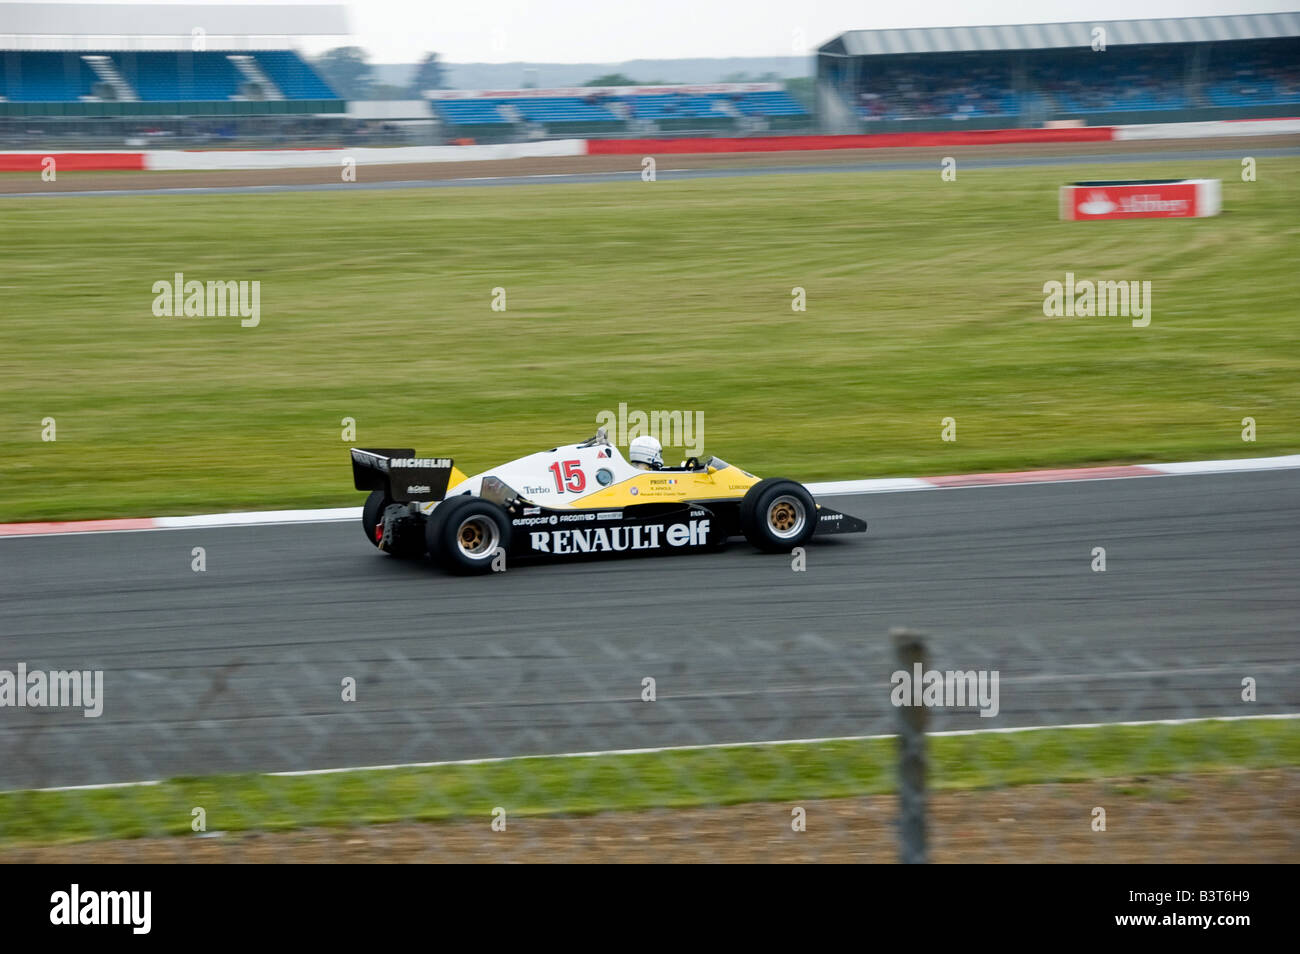 Renault 1983 F1 car at 2008 Renault World Series, Silverstone Stock Photo